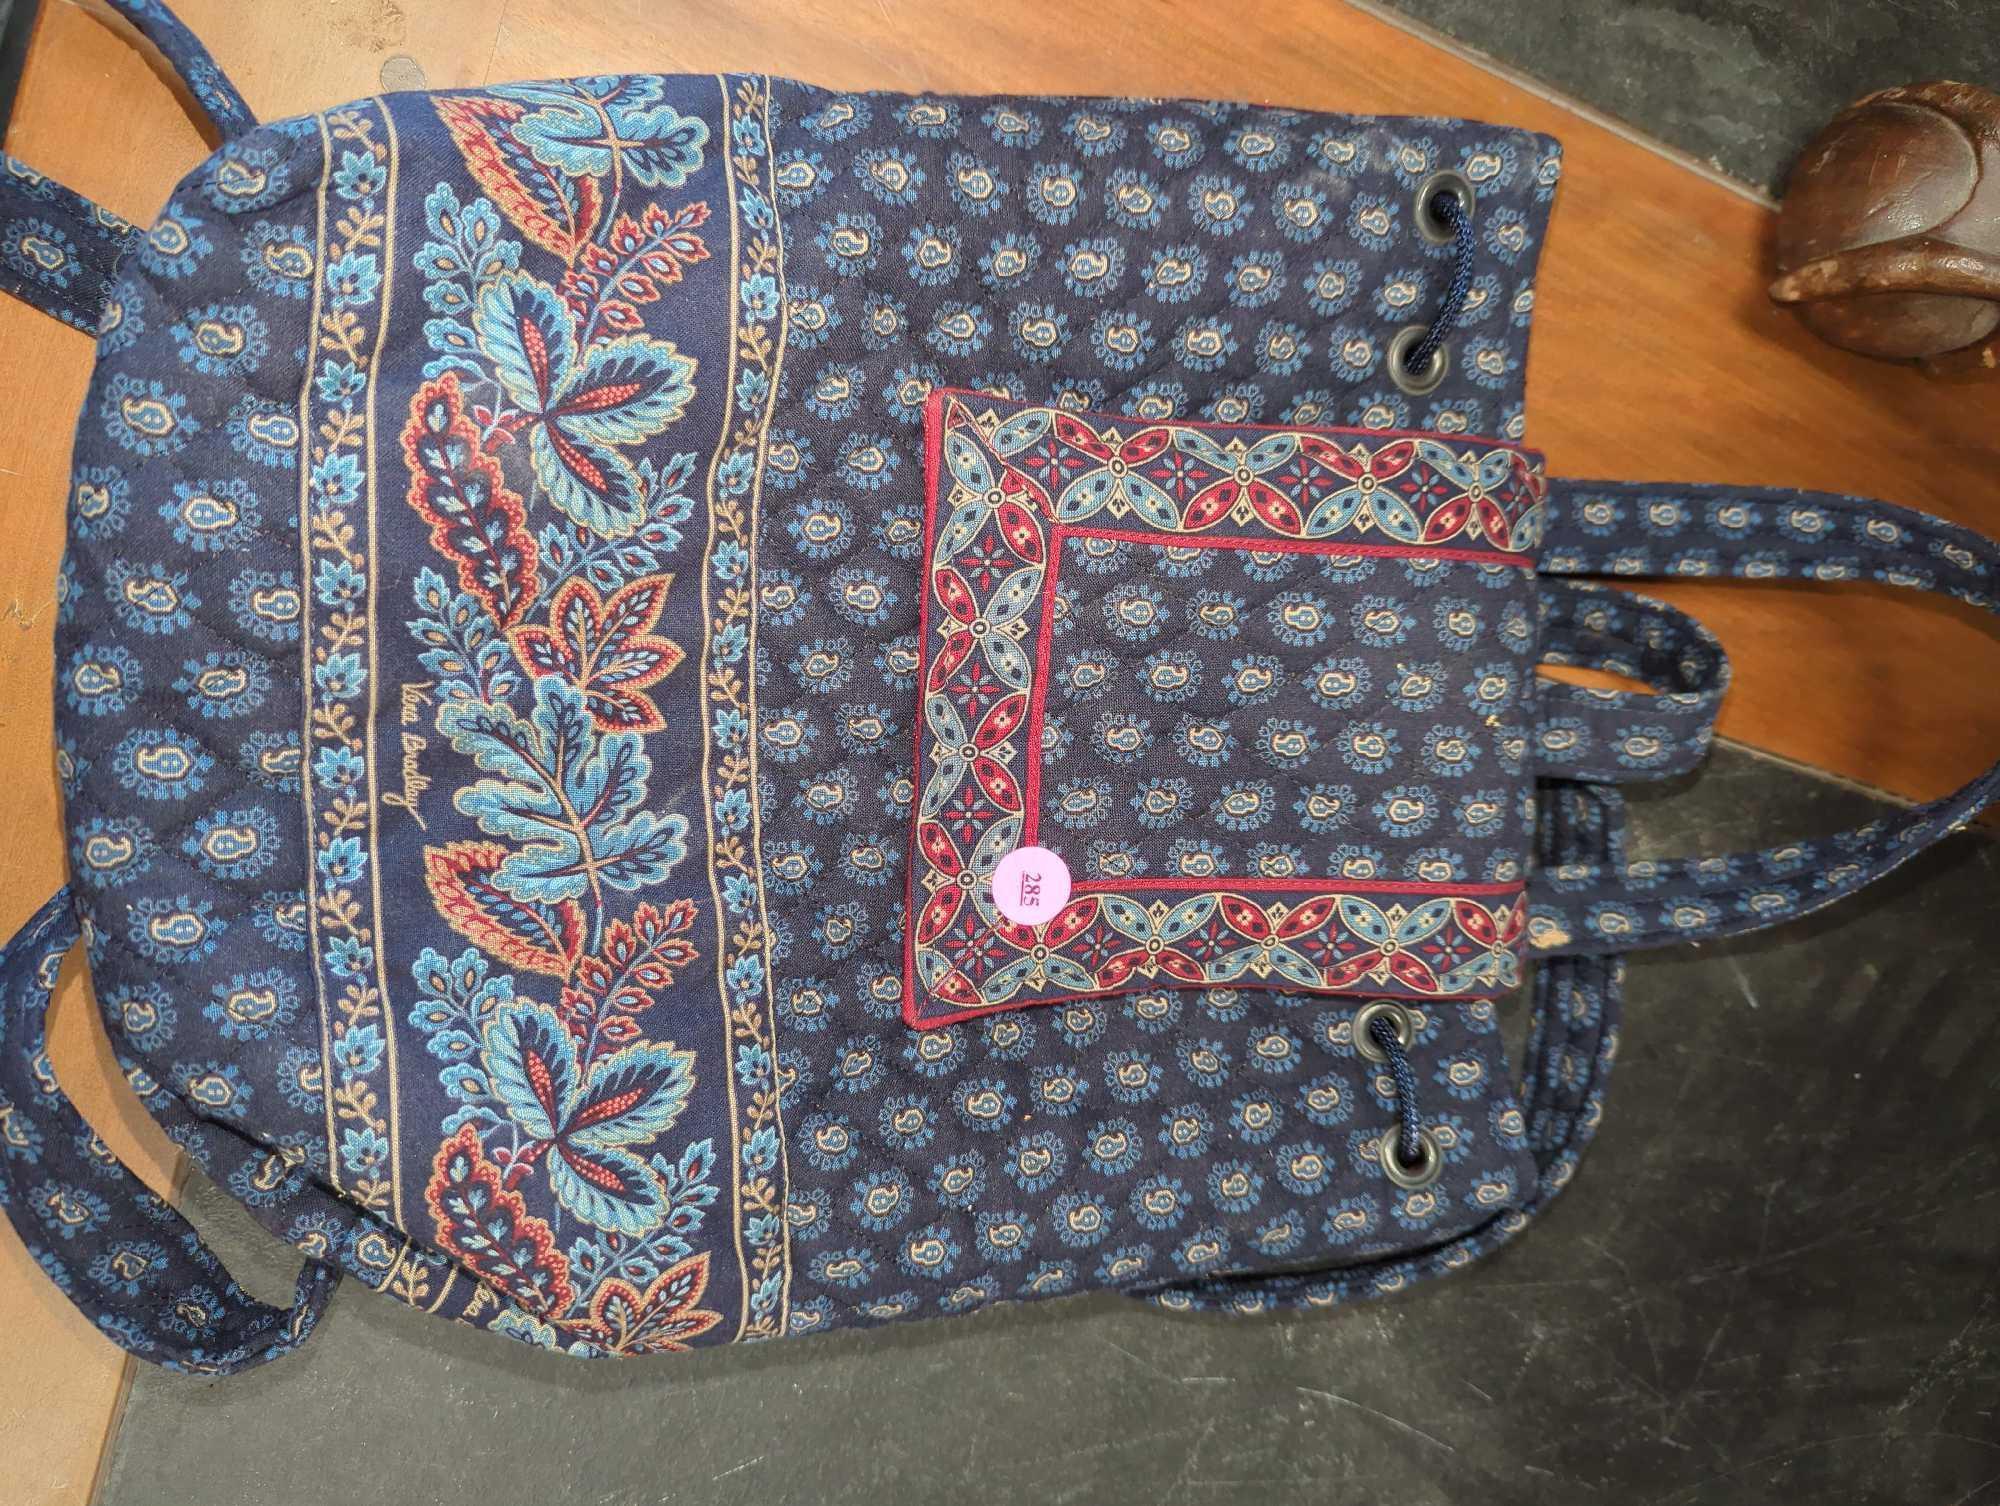 Vera Bradley Backpack Purse Set in 1998 Classic Navy Pattern including Mimi Backpack, Small Cosmetic